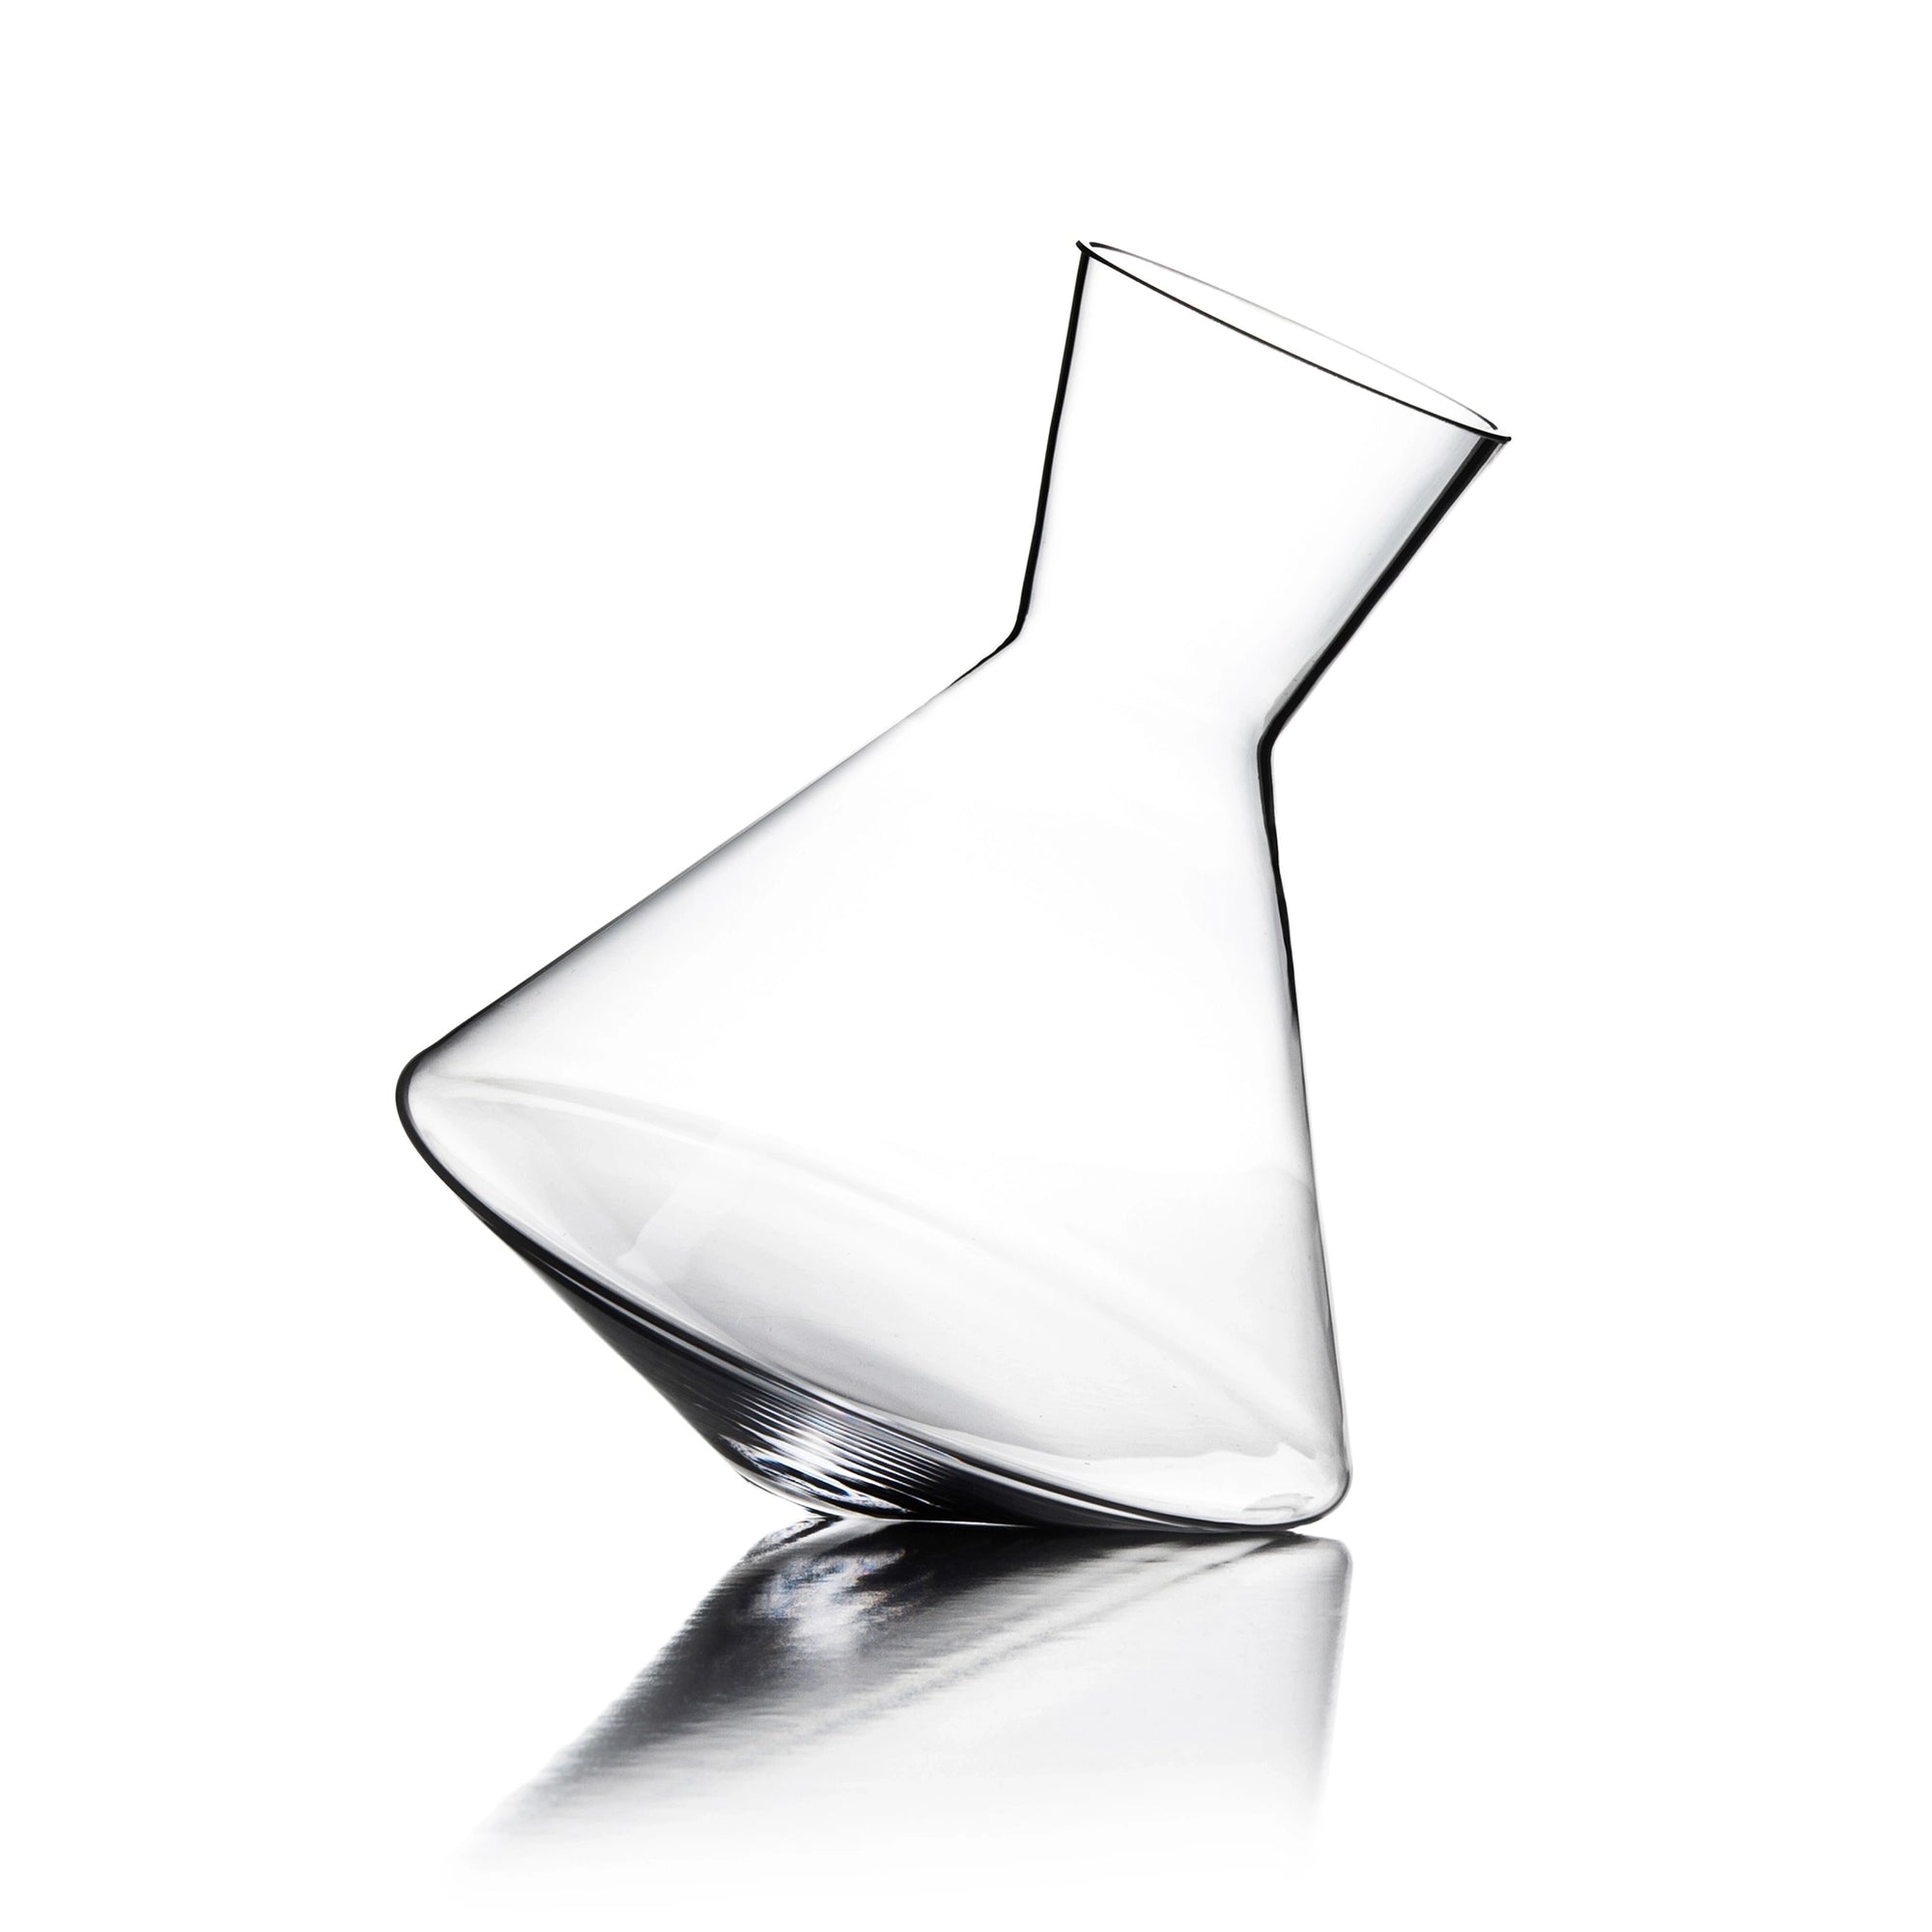 Tilted spinning glass decanter